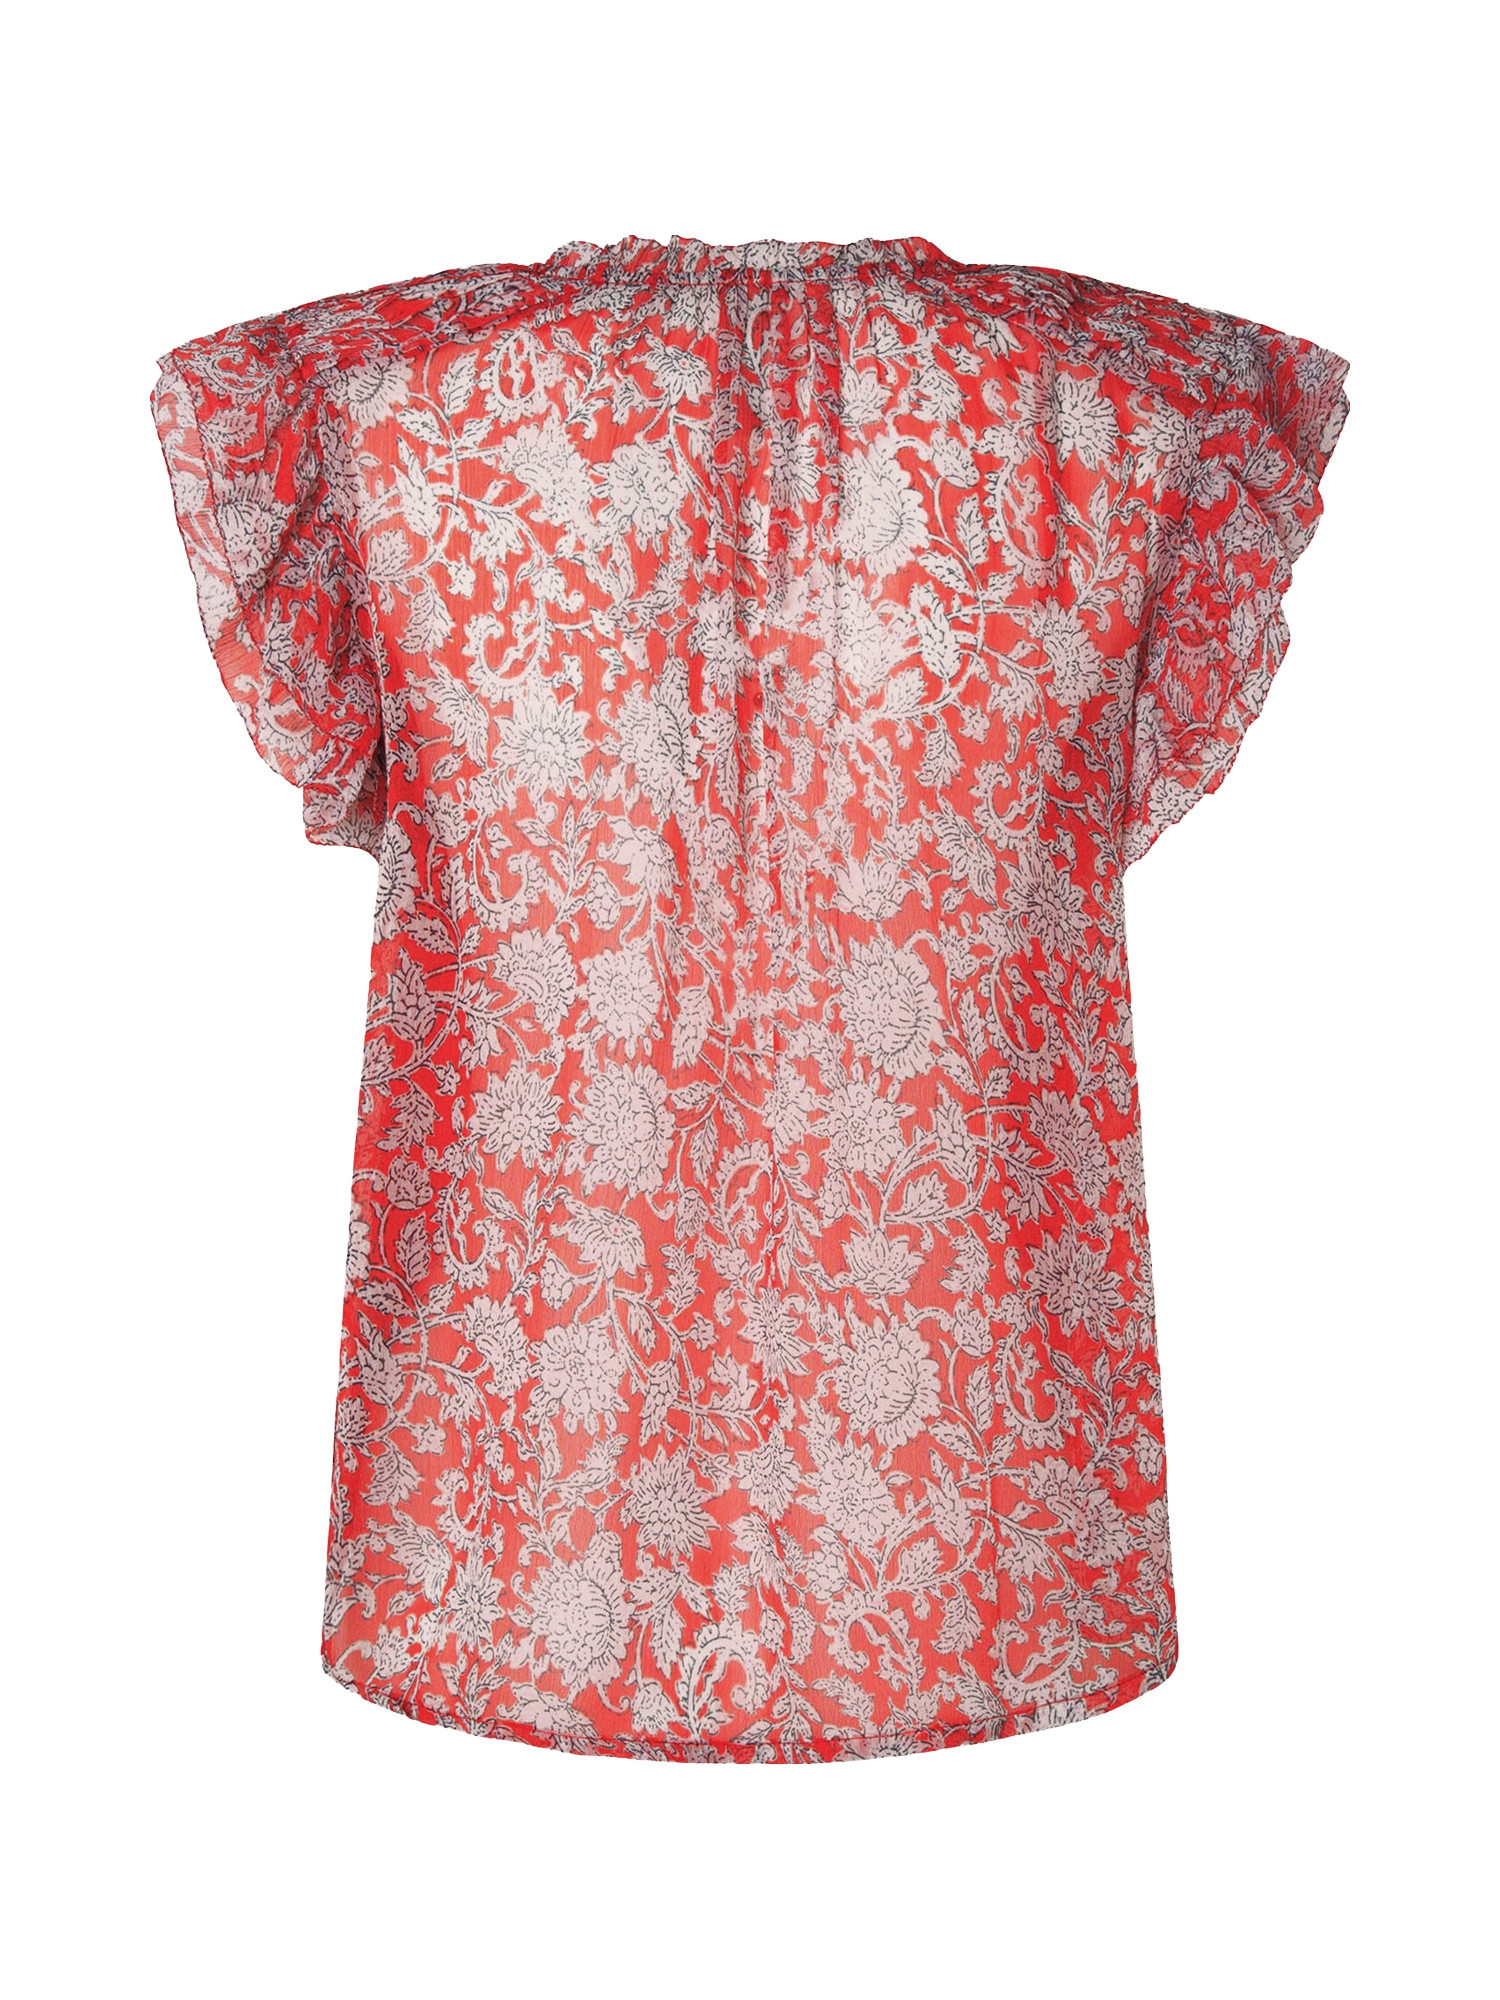 Pepe Jeans - Top a fantasia, Rosso, large image number 1